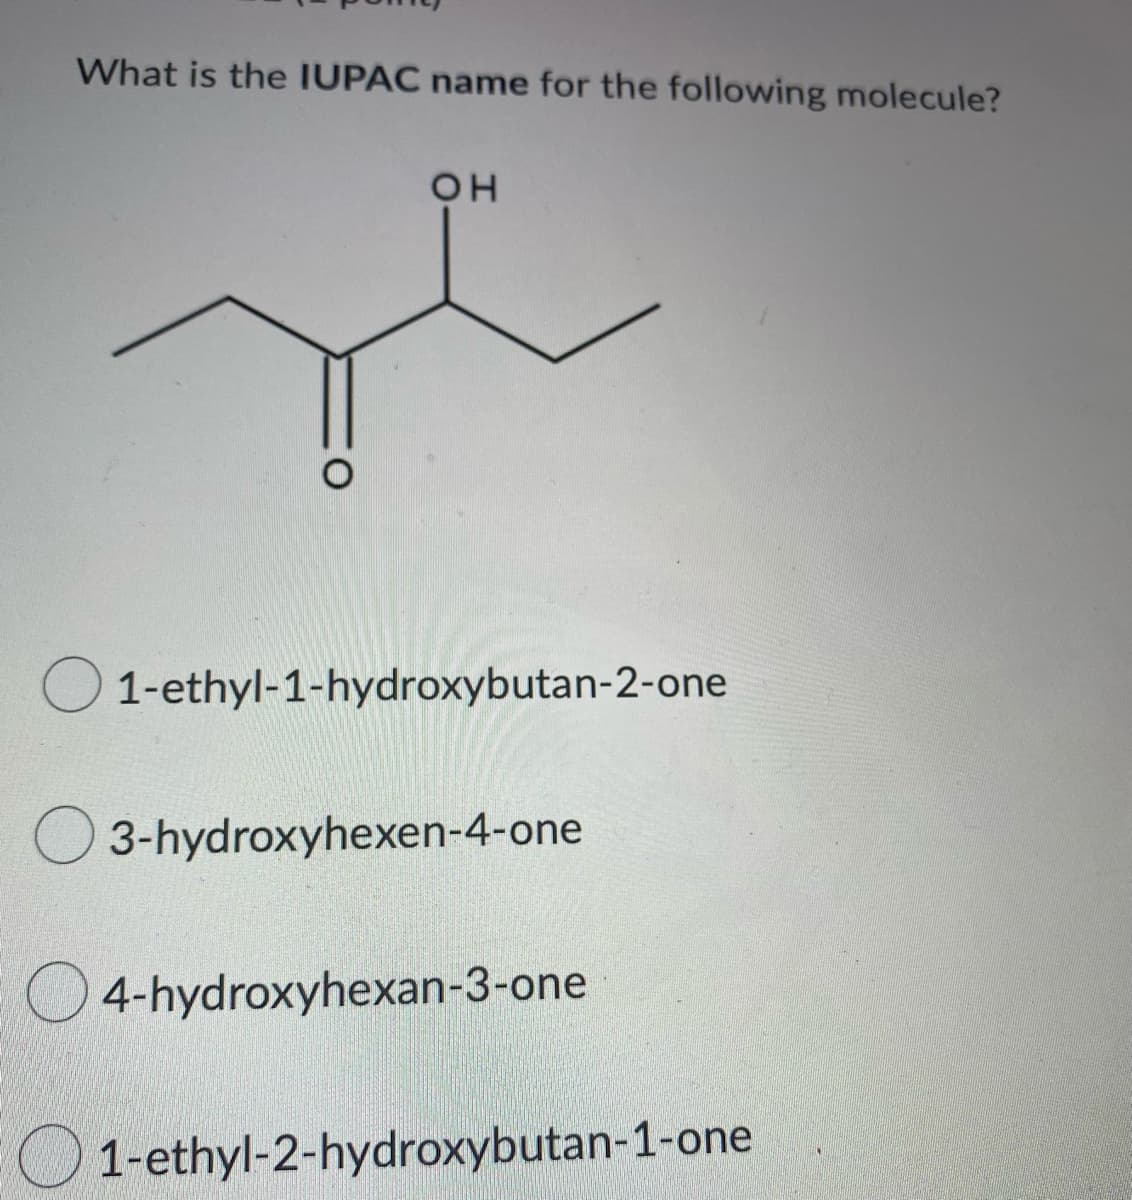 What is the IUPAC name for the following molecule?
OH
O1-ethyl-1-hydroxybutan-2-one
O3-hydroxyhexen-4-one
4-hydroxyhexan-3-one
O1-ethyl-2-hydroxybutan-1-one